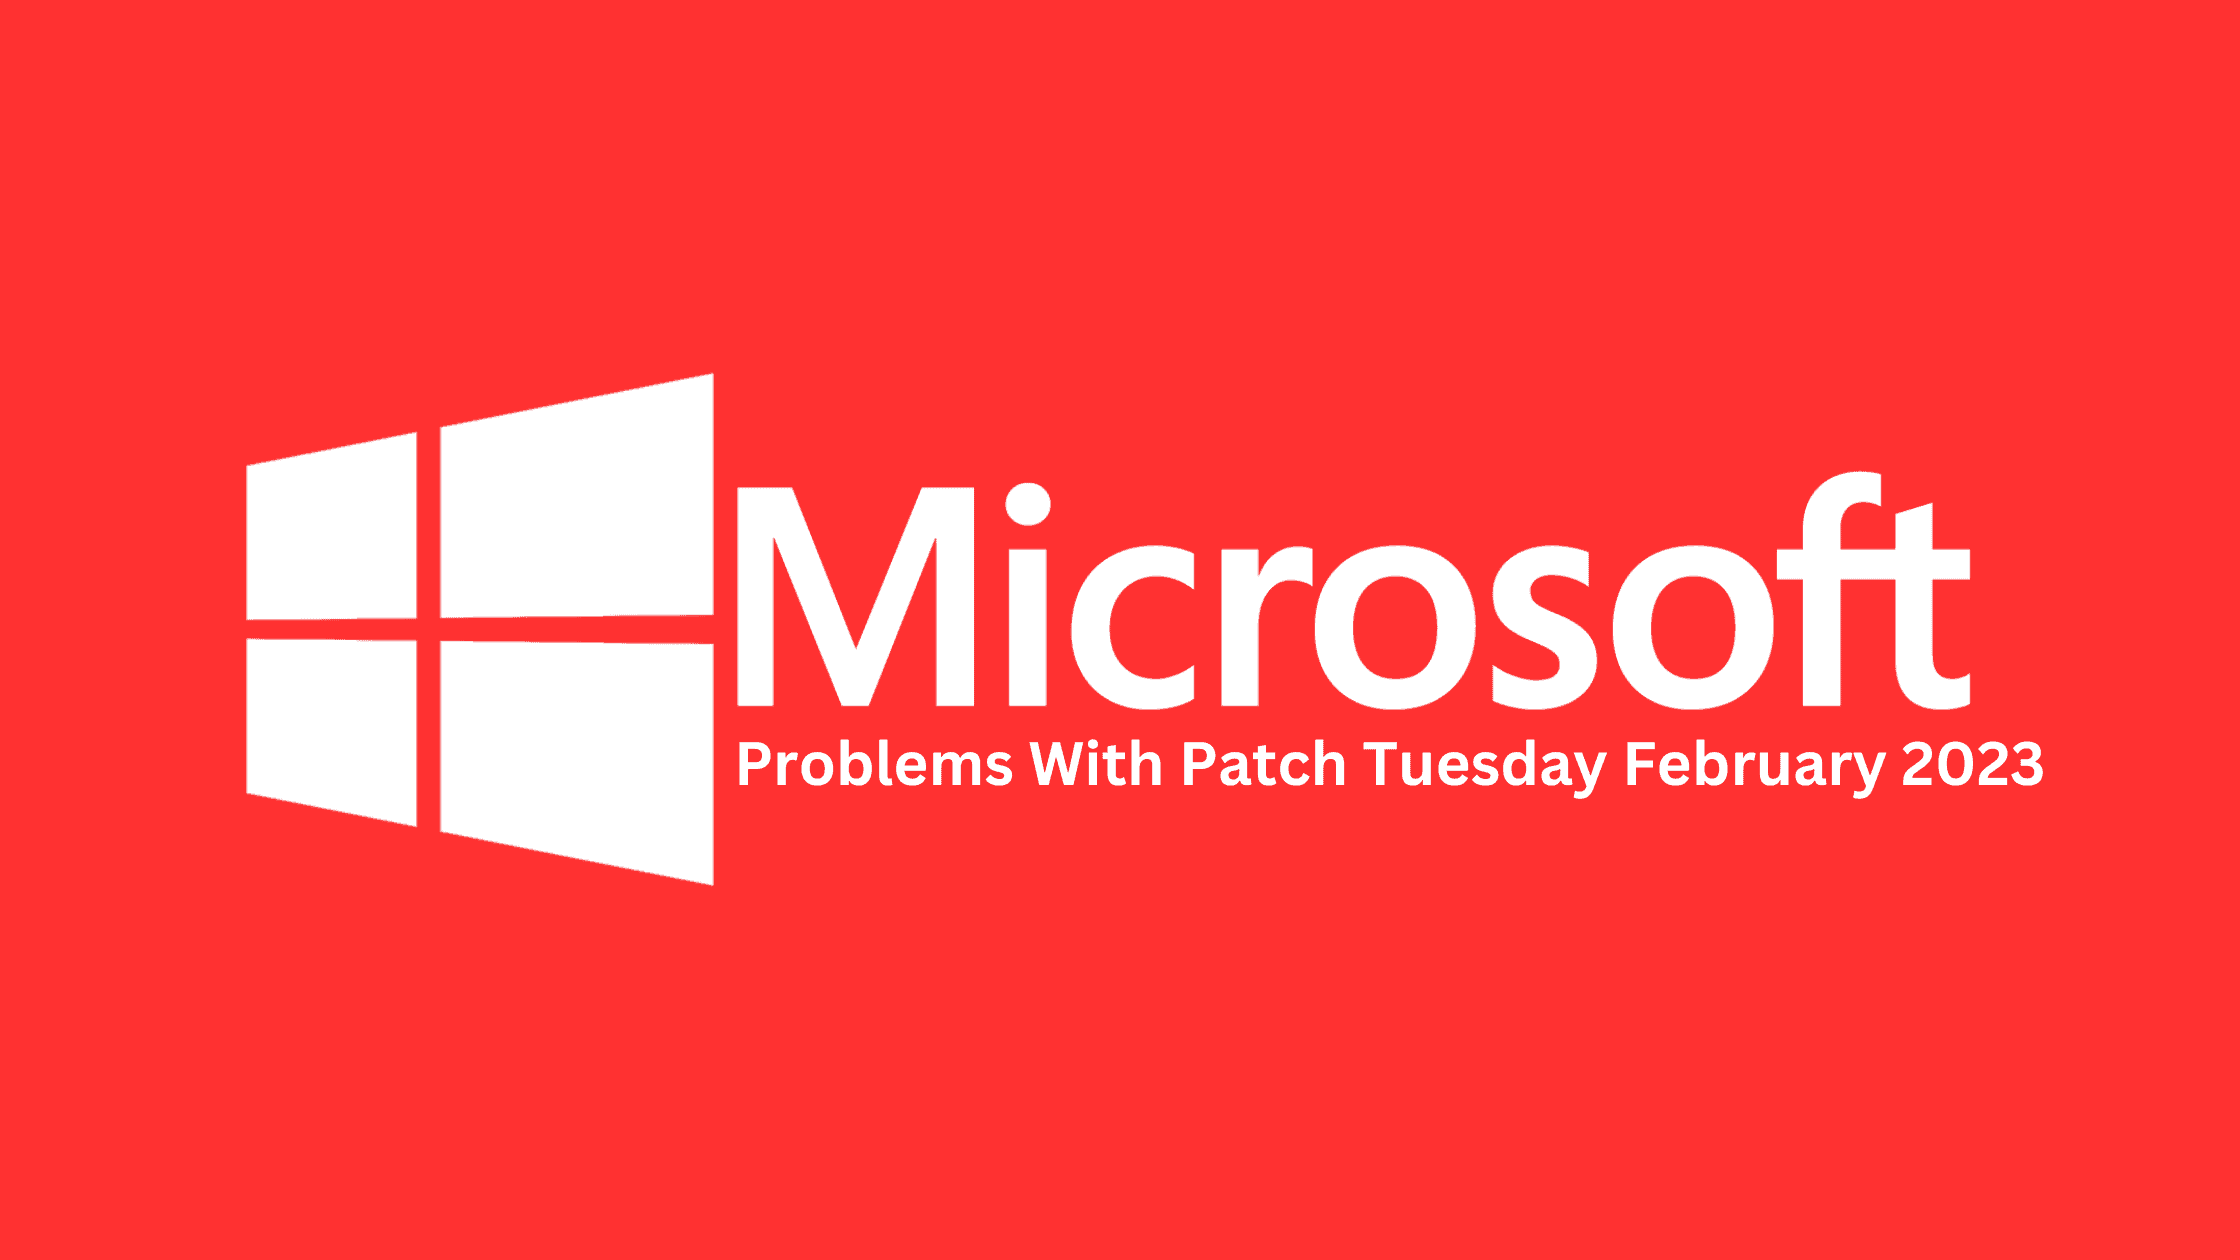 How To Mitigate Windows Server 2022 Boot Issues Upon Patching Februarys Security Updates